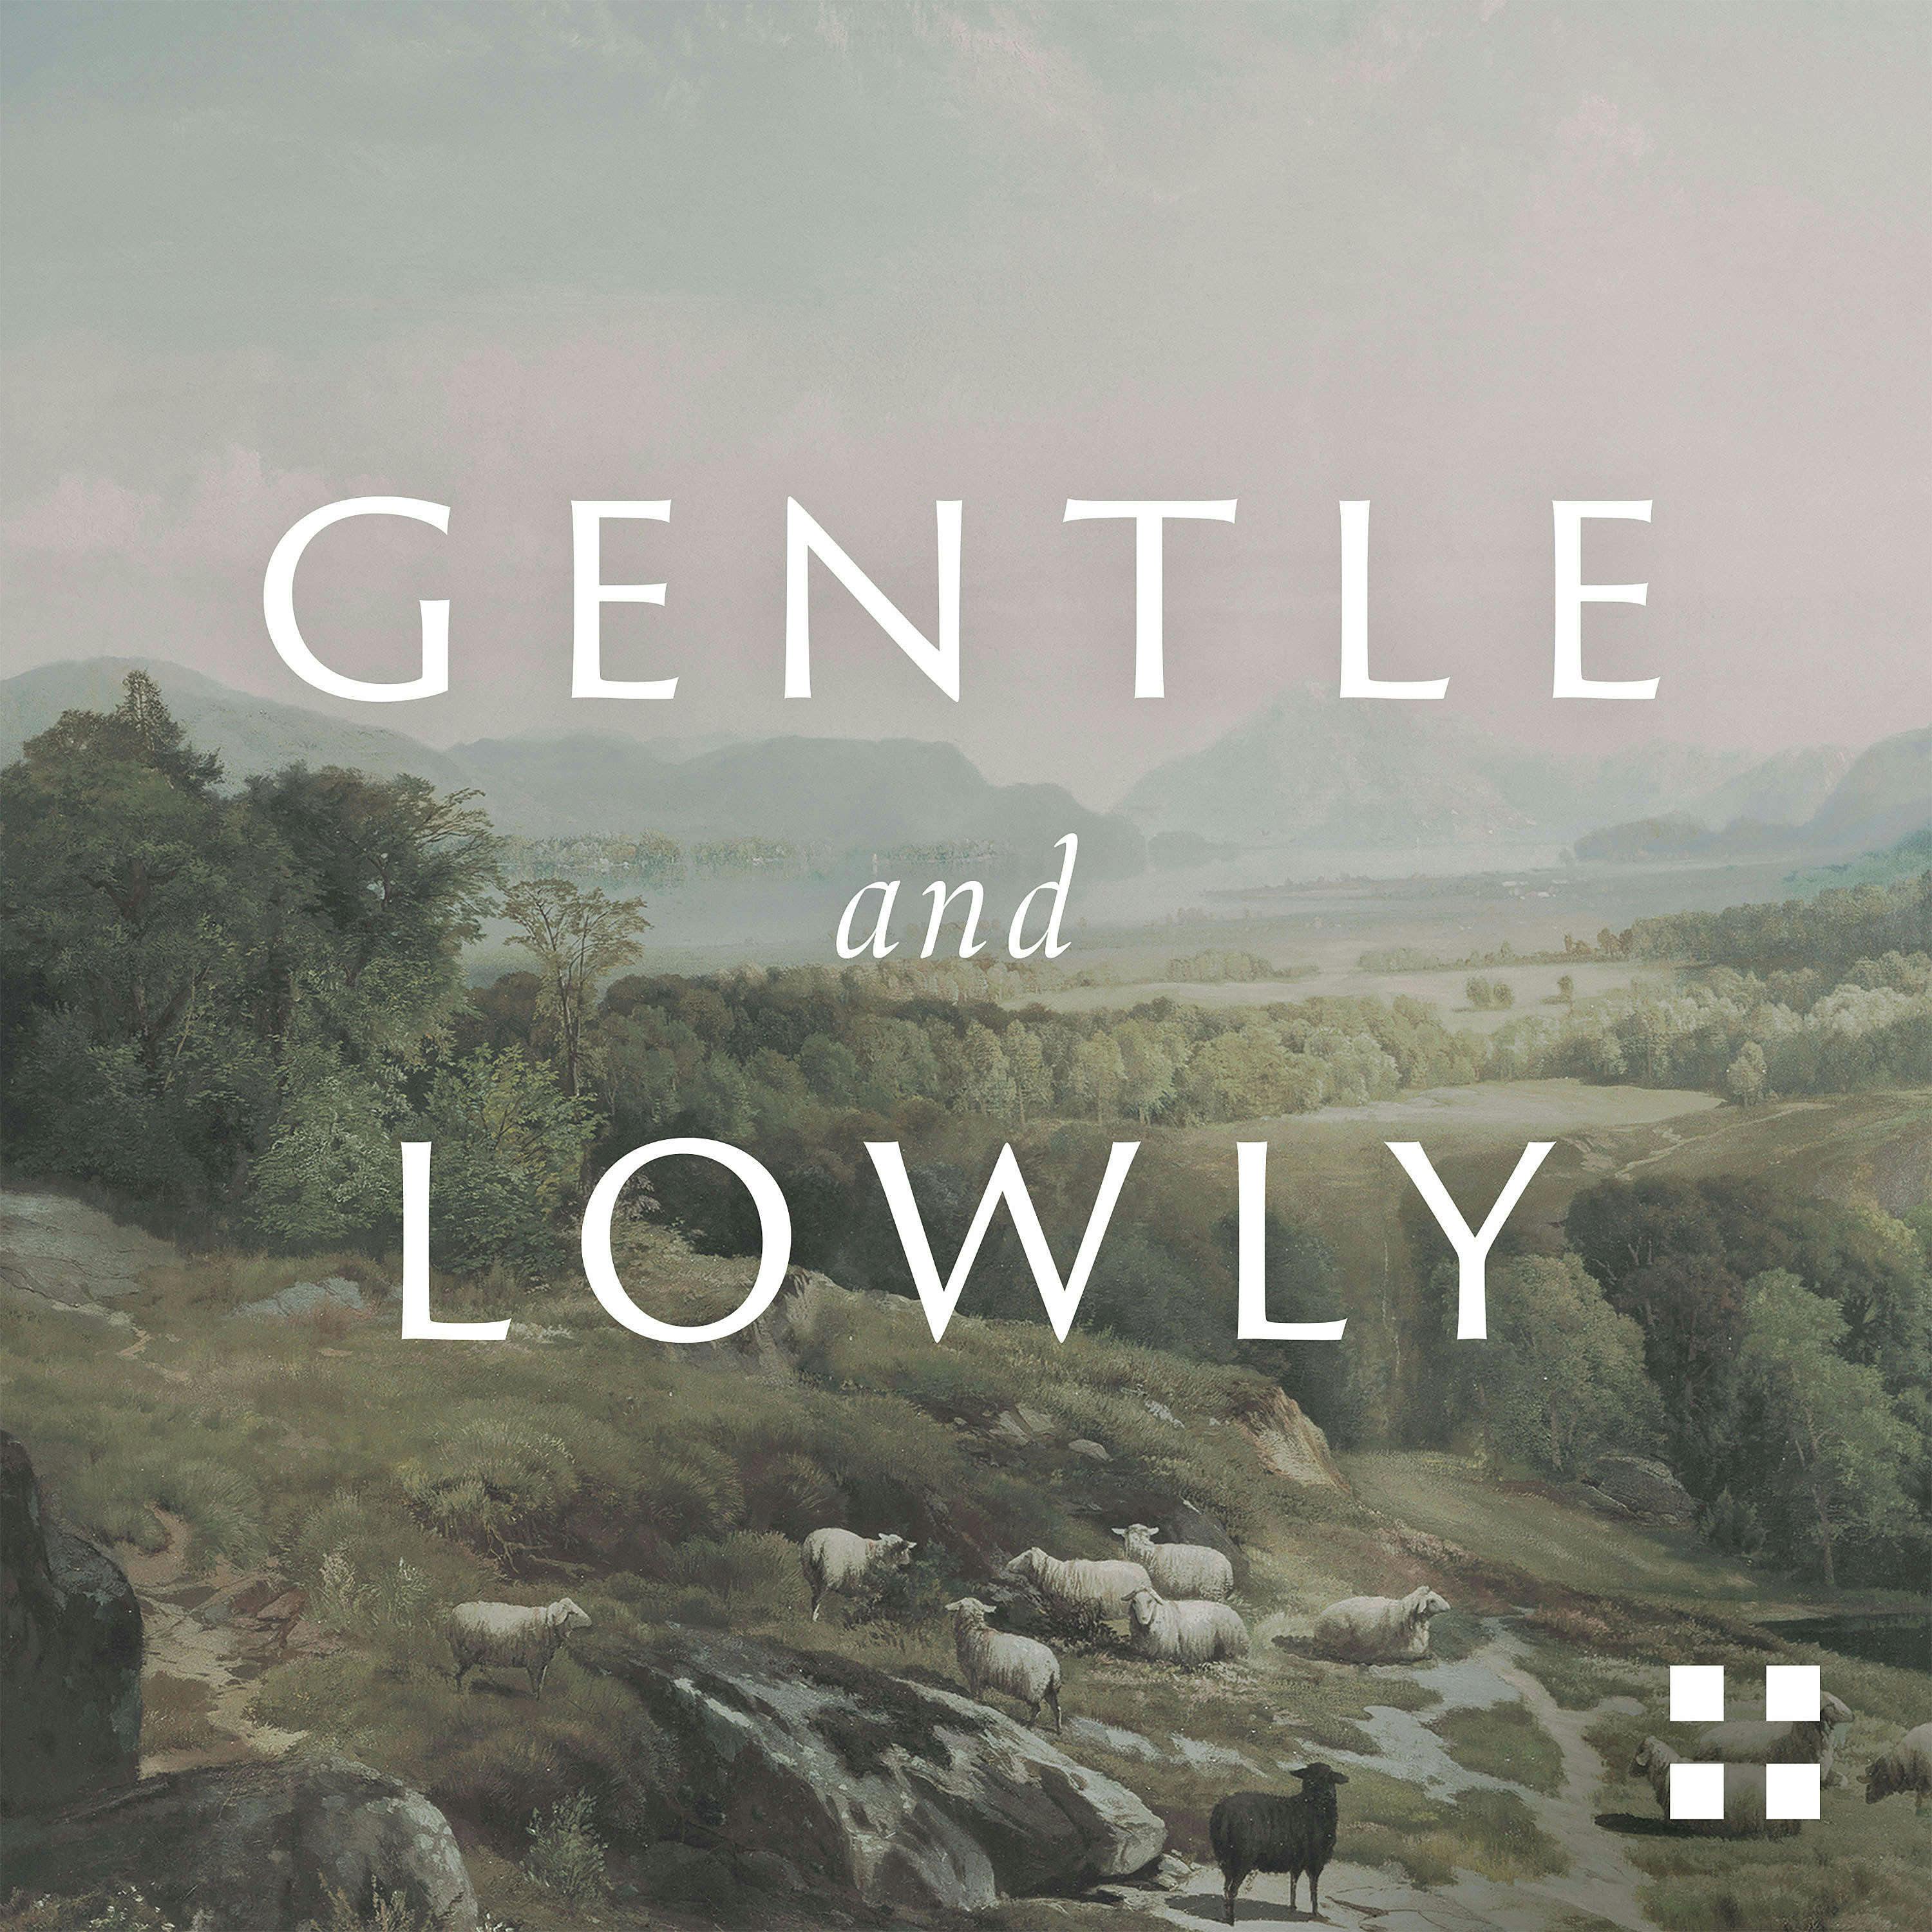 Day 1 - Gentle and Lowly in Heart